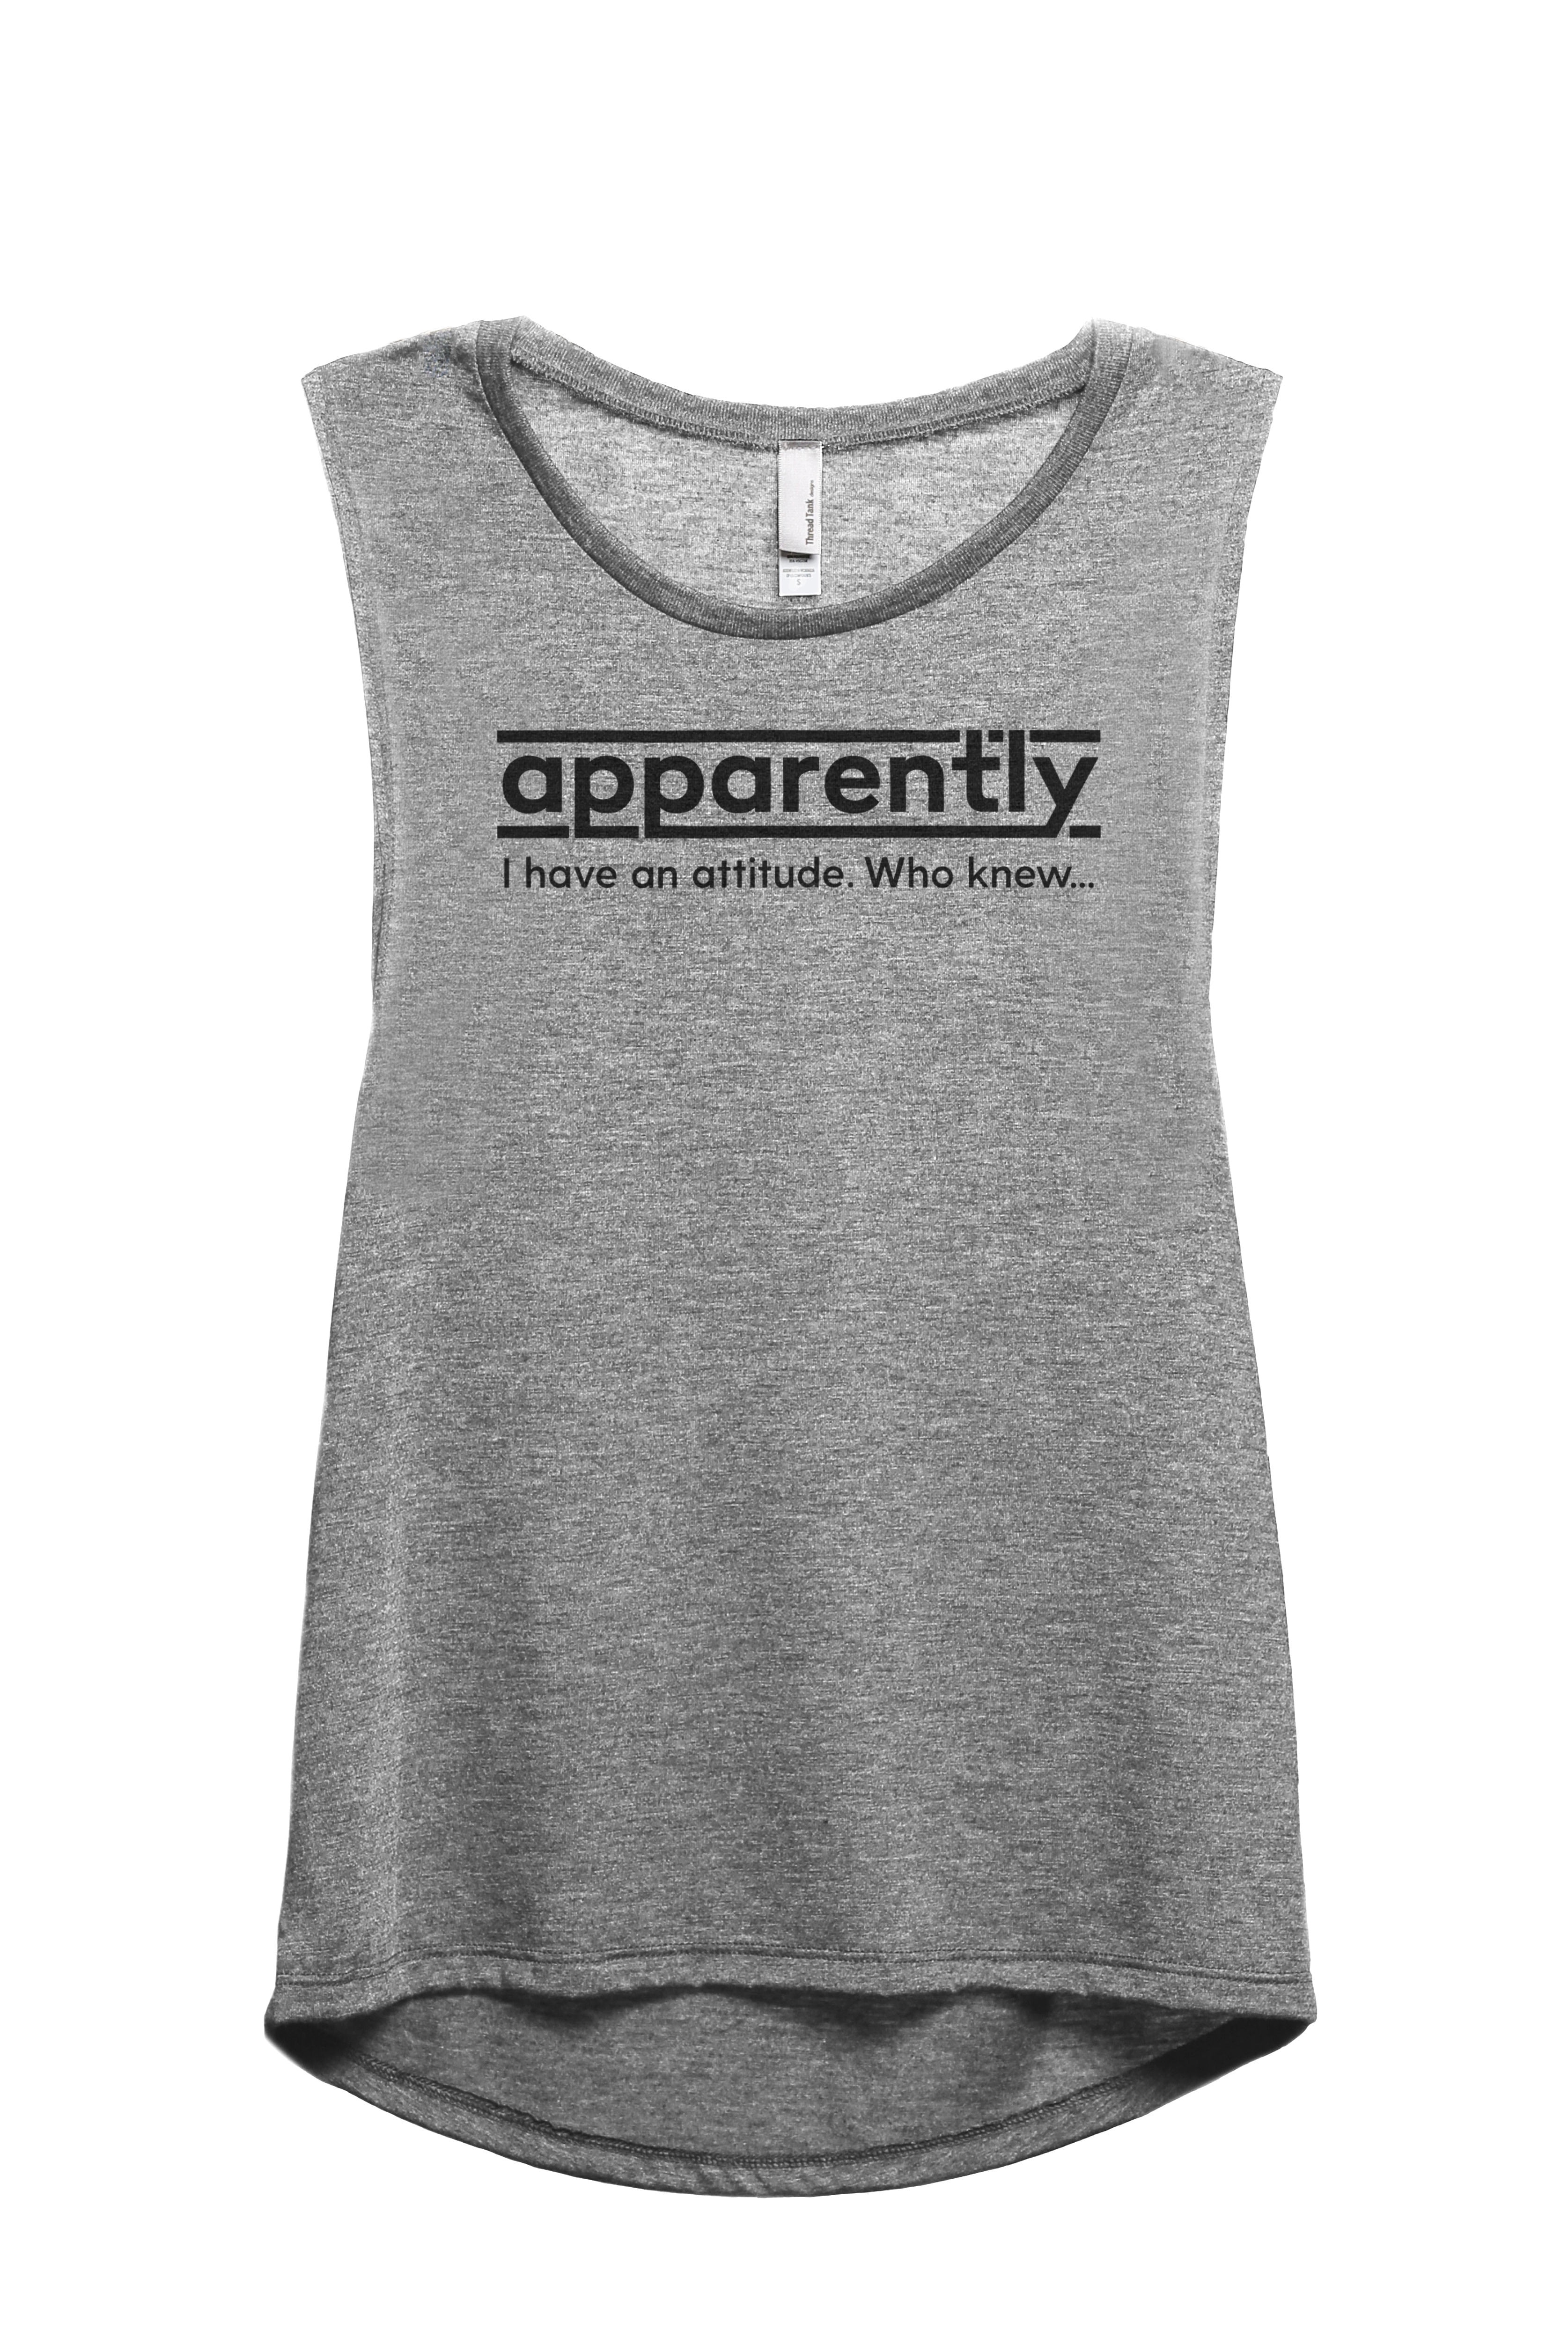 Apparently I Have An Attitude Who Knew Women's Fashion Sleeveless Muscle  Workout Yoga Tank Top Heather Grey Grey Small 